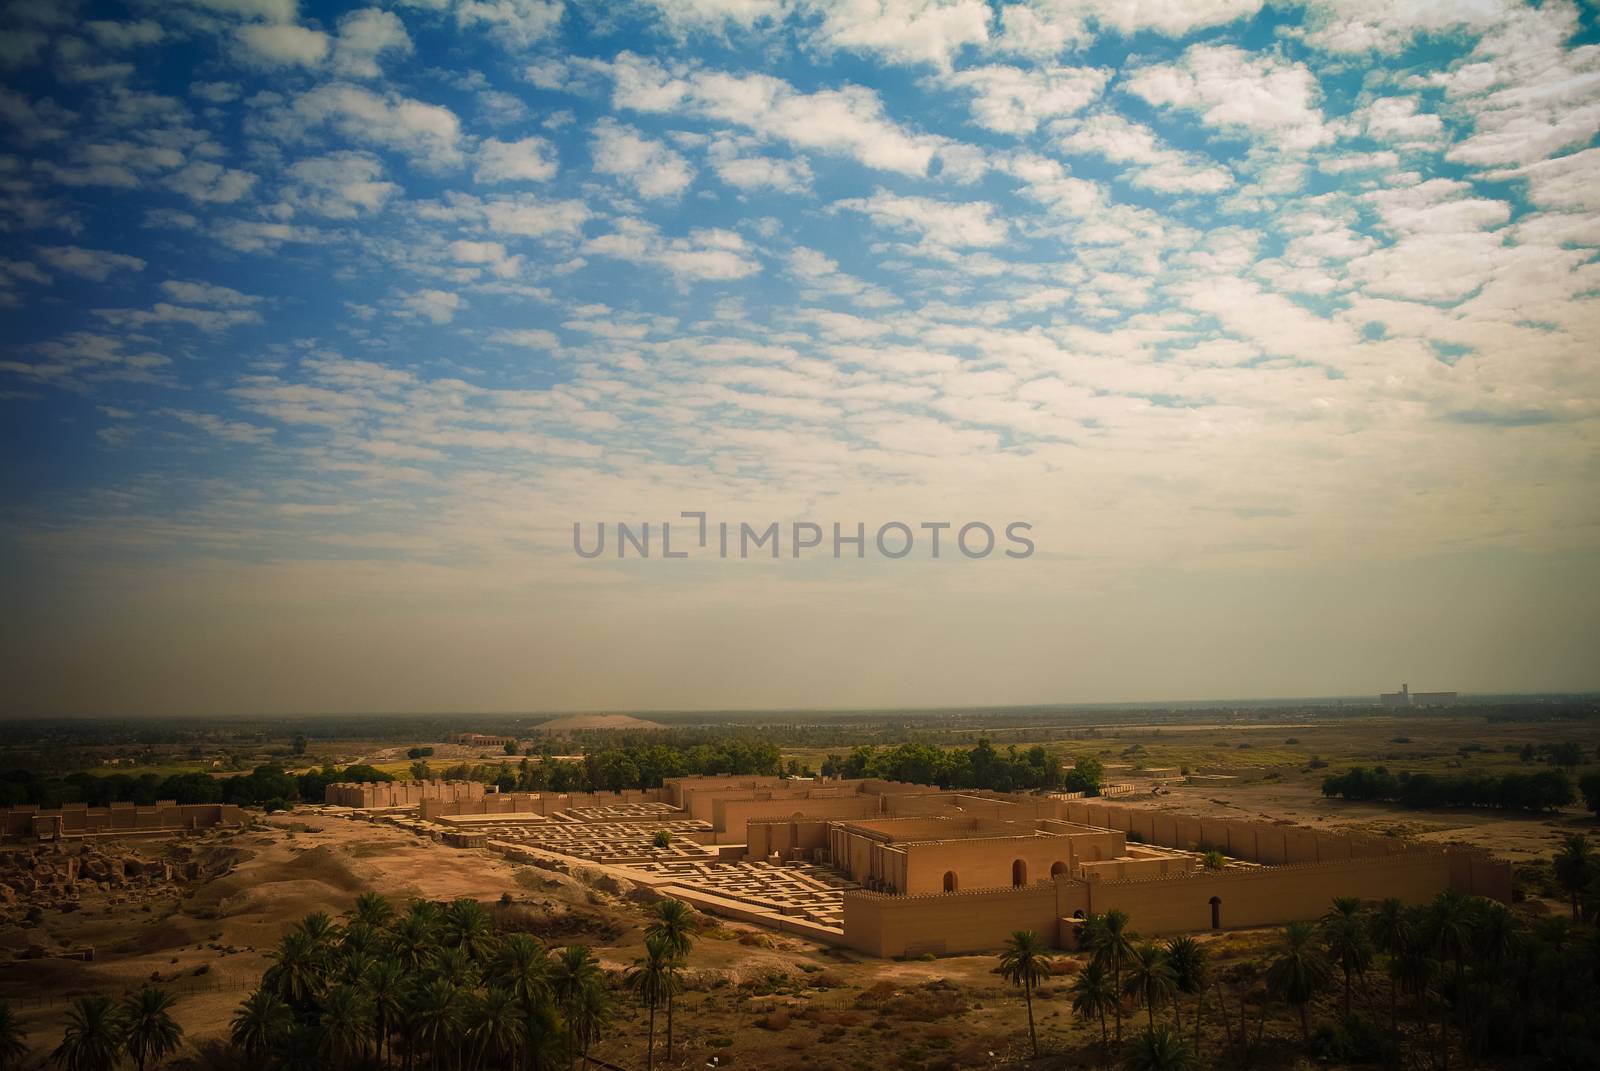 Panorama of partially restored Babylon ruins, Iraq by homocosmicos